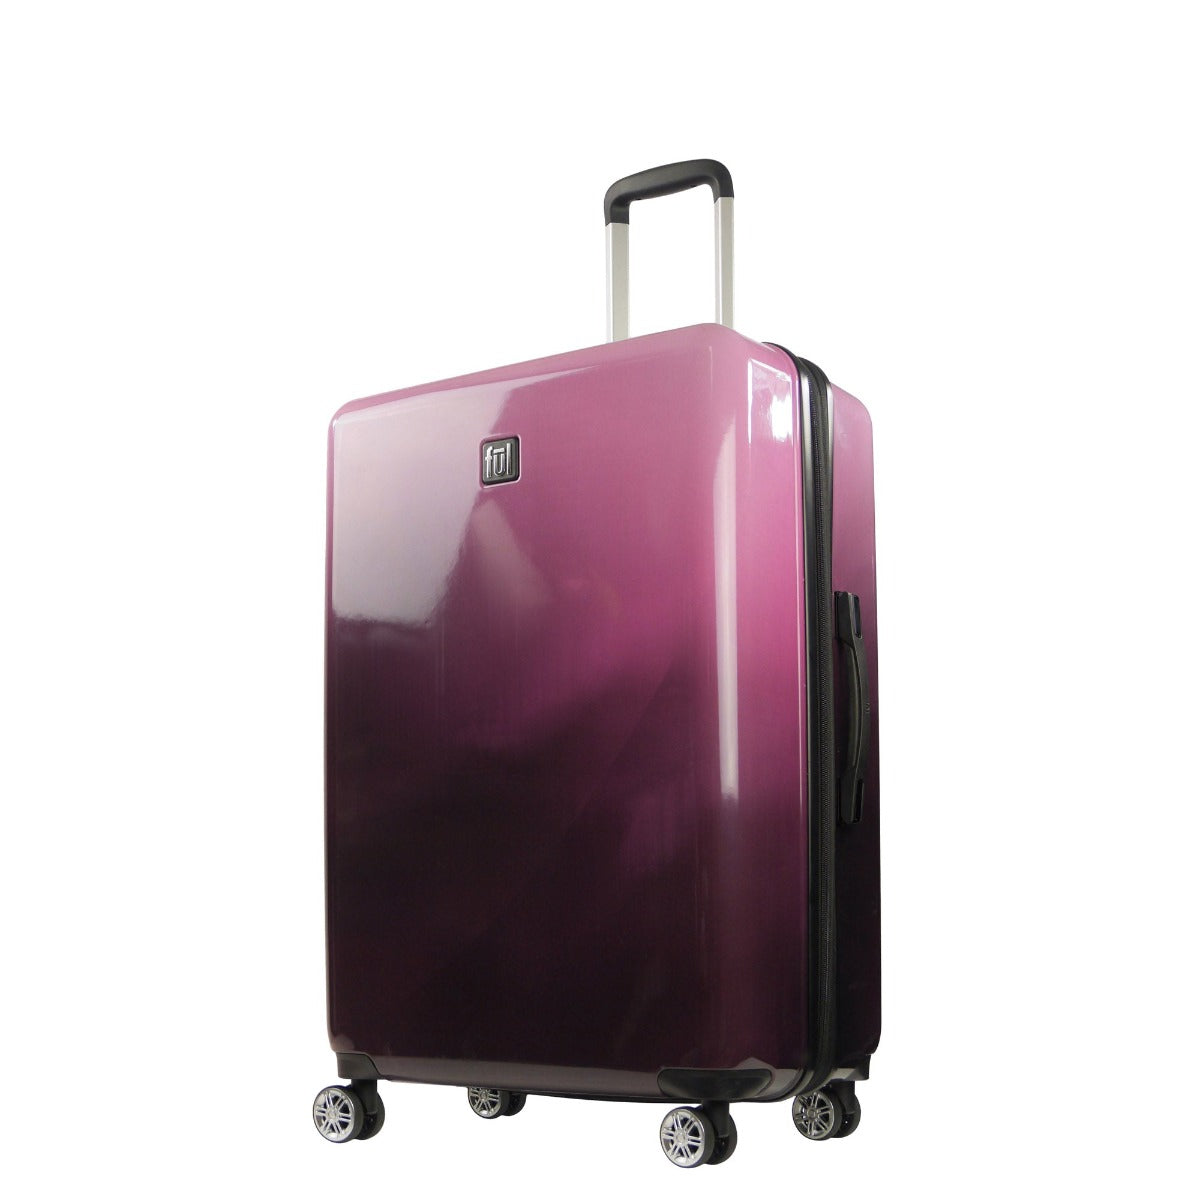 Ful Impulse Ombre Hardside Spinner Suitcase 31" Checked Luggage Pink Purple Fade 360° spinner wheels 2" expansion